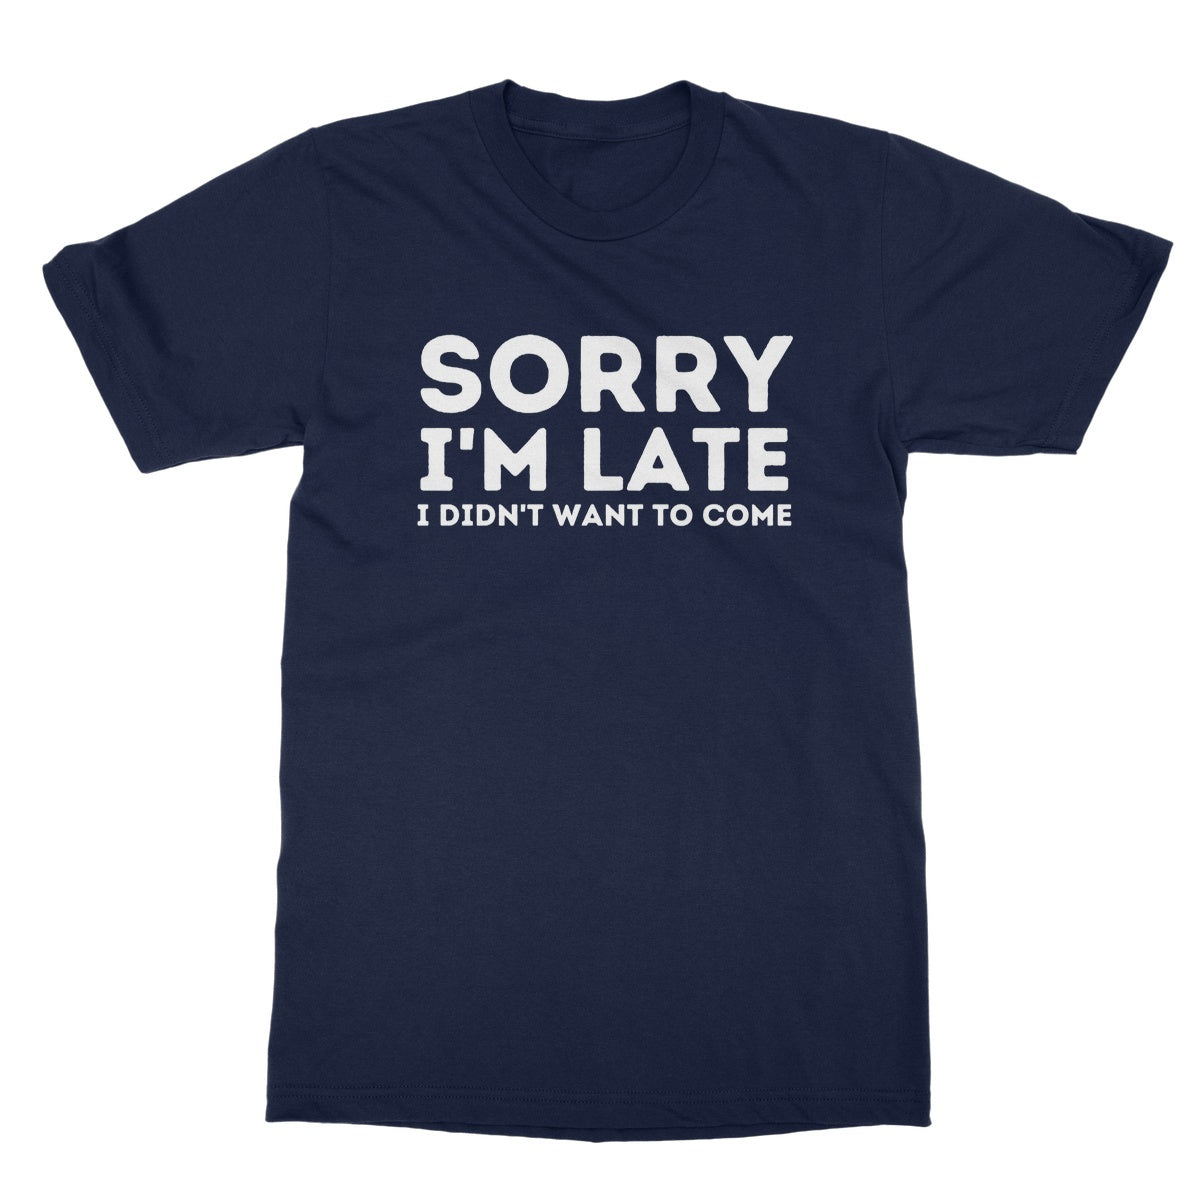 sorry I'm late I didn't want to come t shirt navy